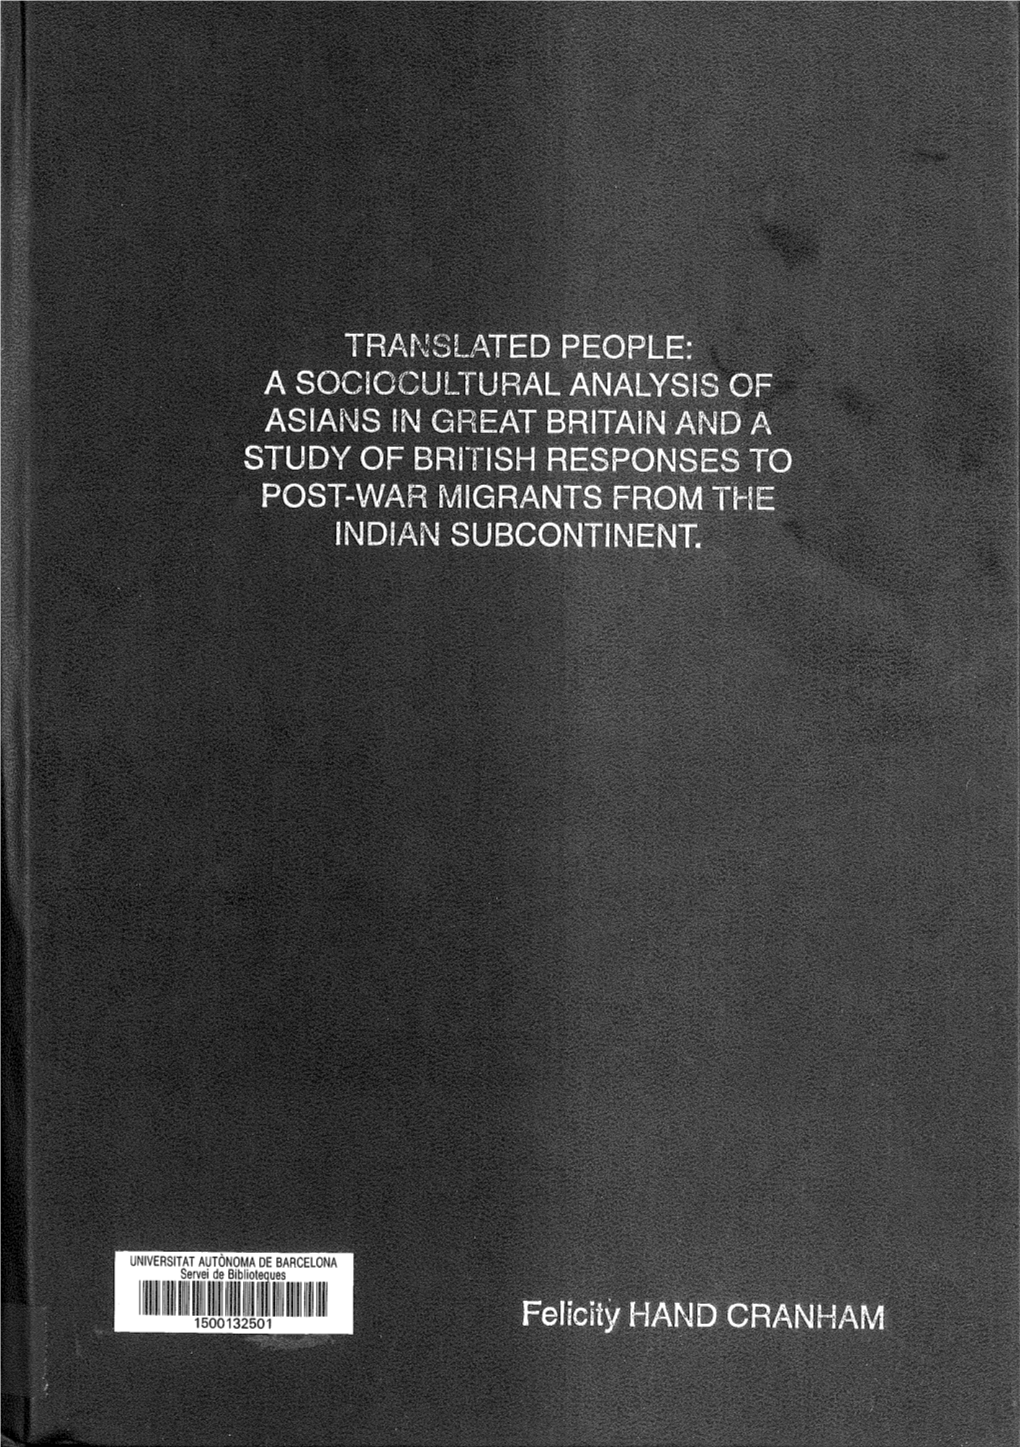 Translated People: a Sociocultural Analysis of Asians in Great Britain and a Study of British Responses to Post-War Migrants from the Indian Subcontinent